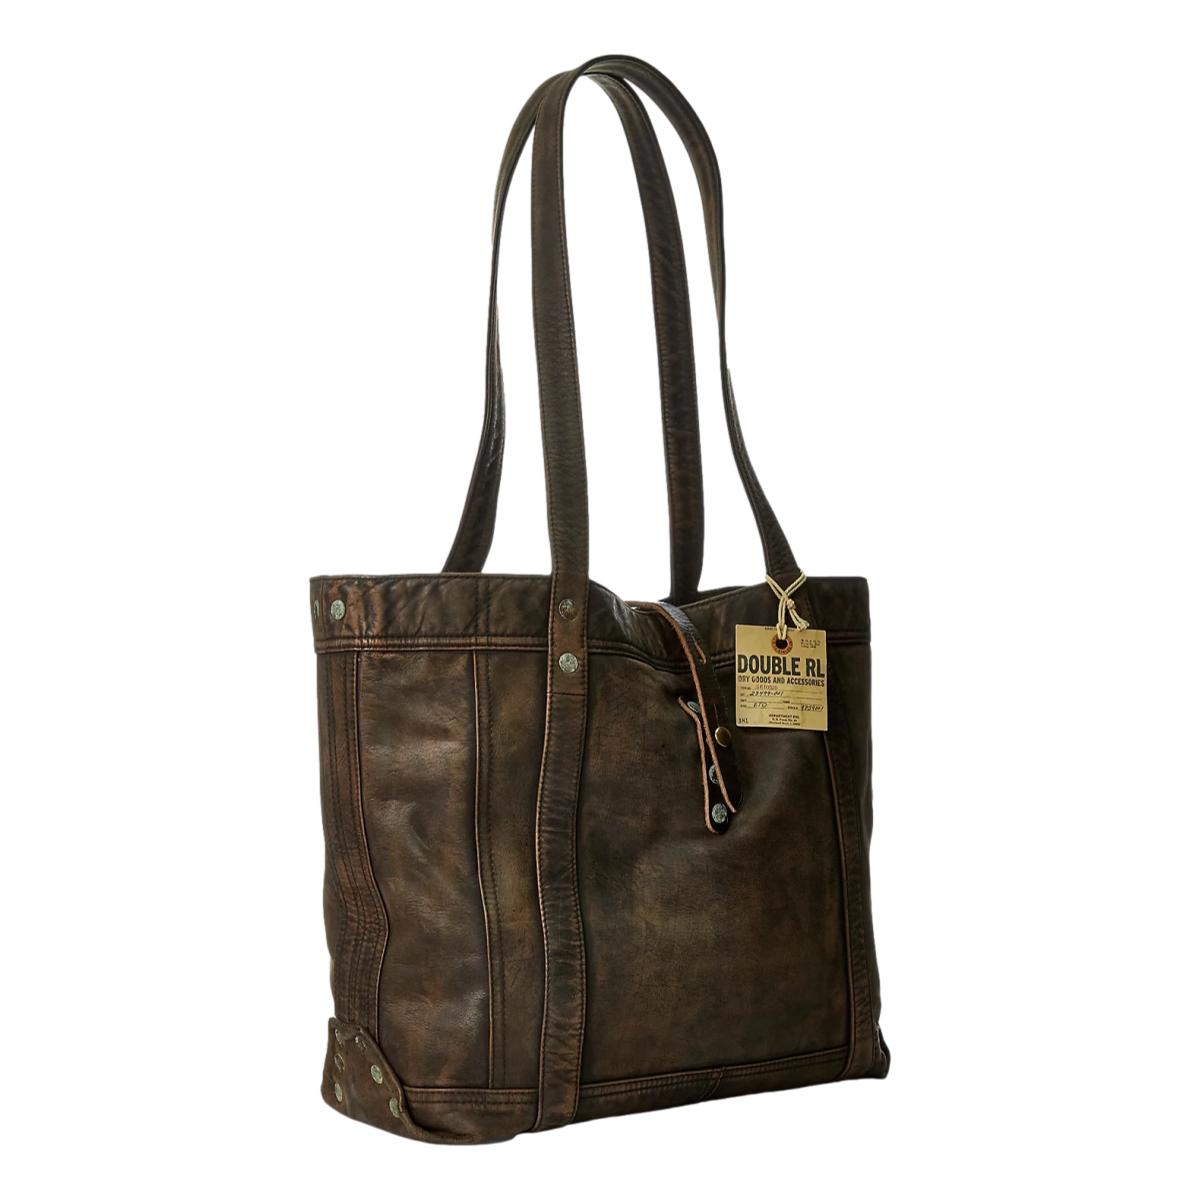 Leather Tote Black Over Brown - Leather Bag